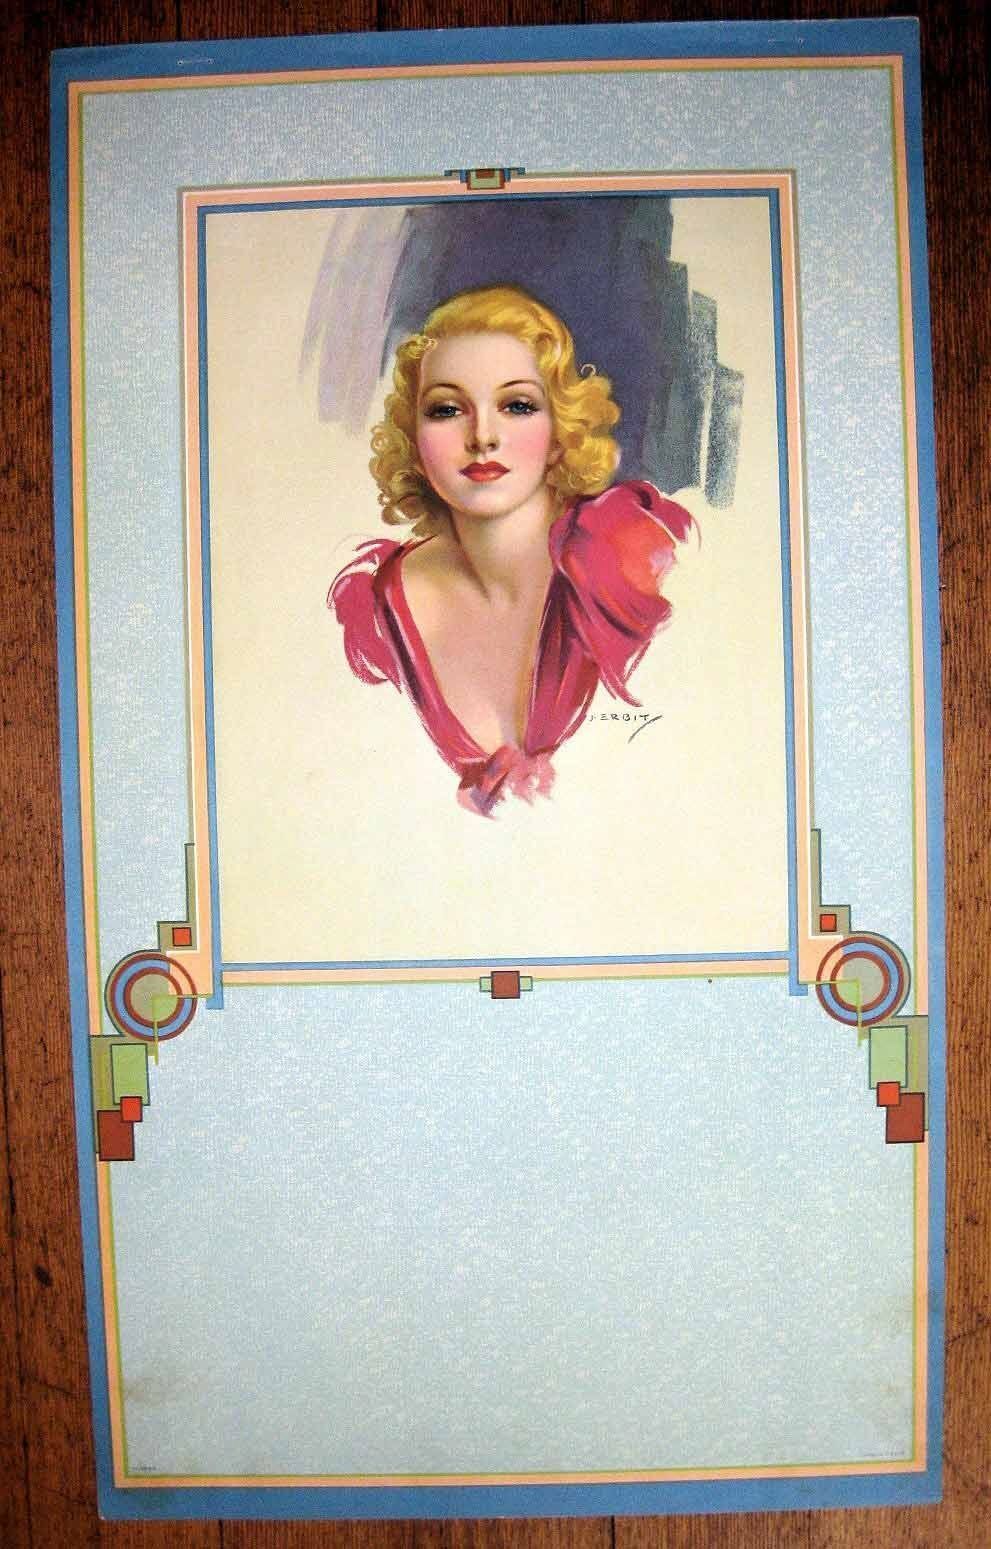 1930s Pinup Girl Picture by Erbit Pastel Blond w/ Deco Border    M